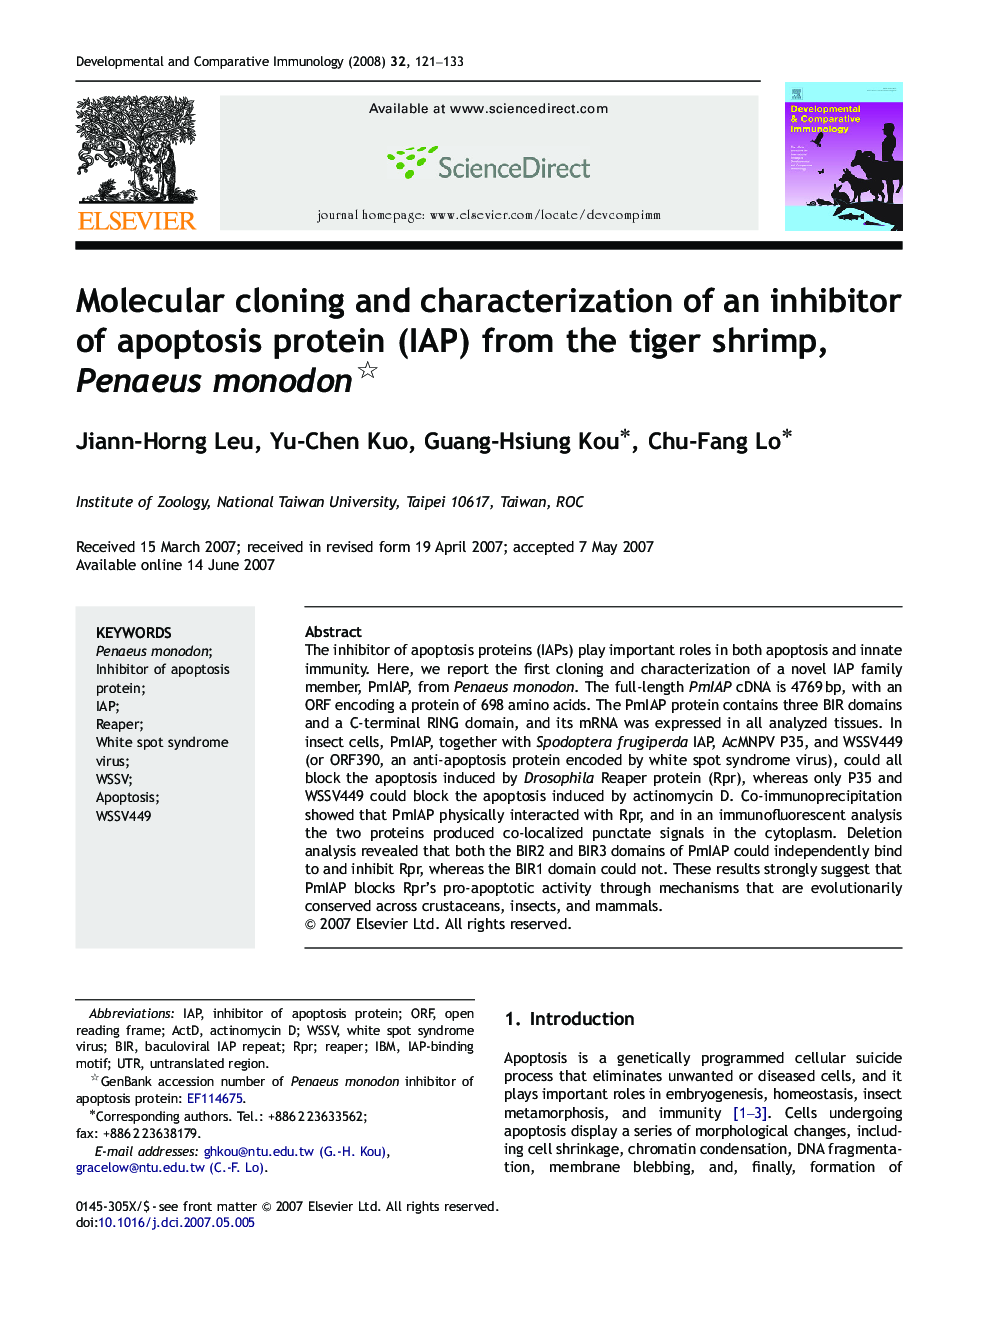 Molecular cloning and characterization of an inhibitor of apoptosis protein (IAP) from the tiger shrimp, Penaeus monodon 